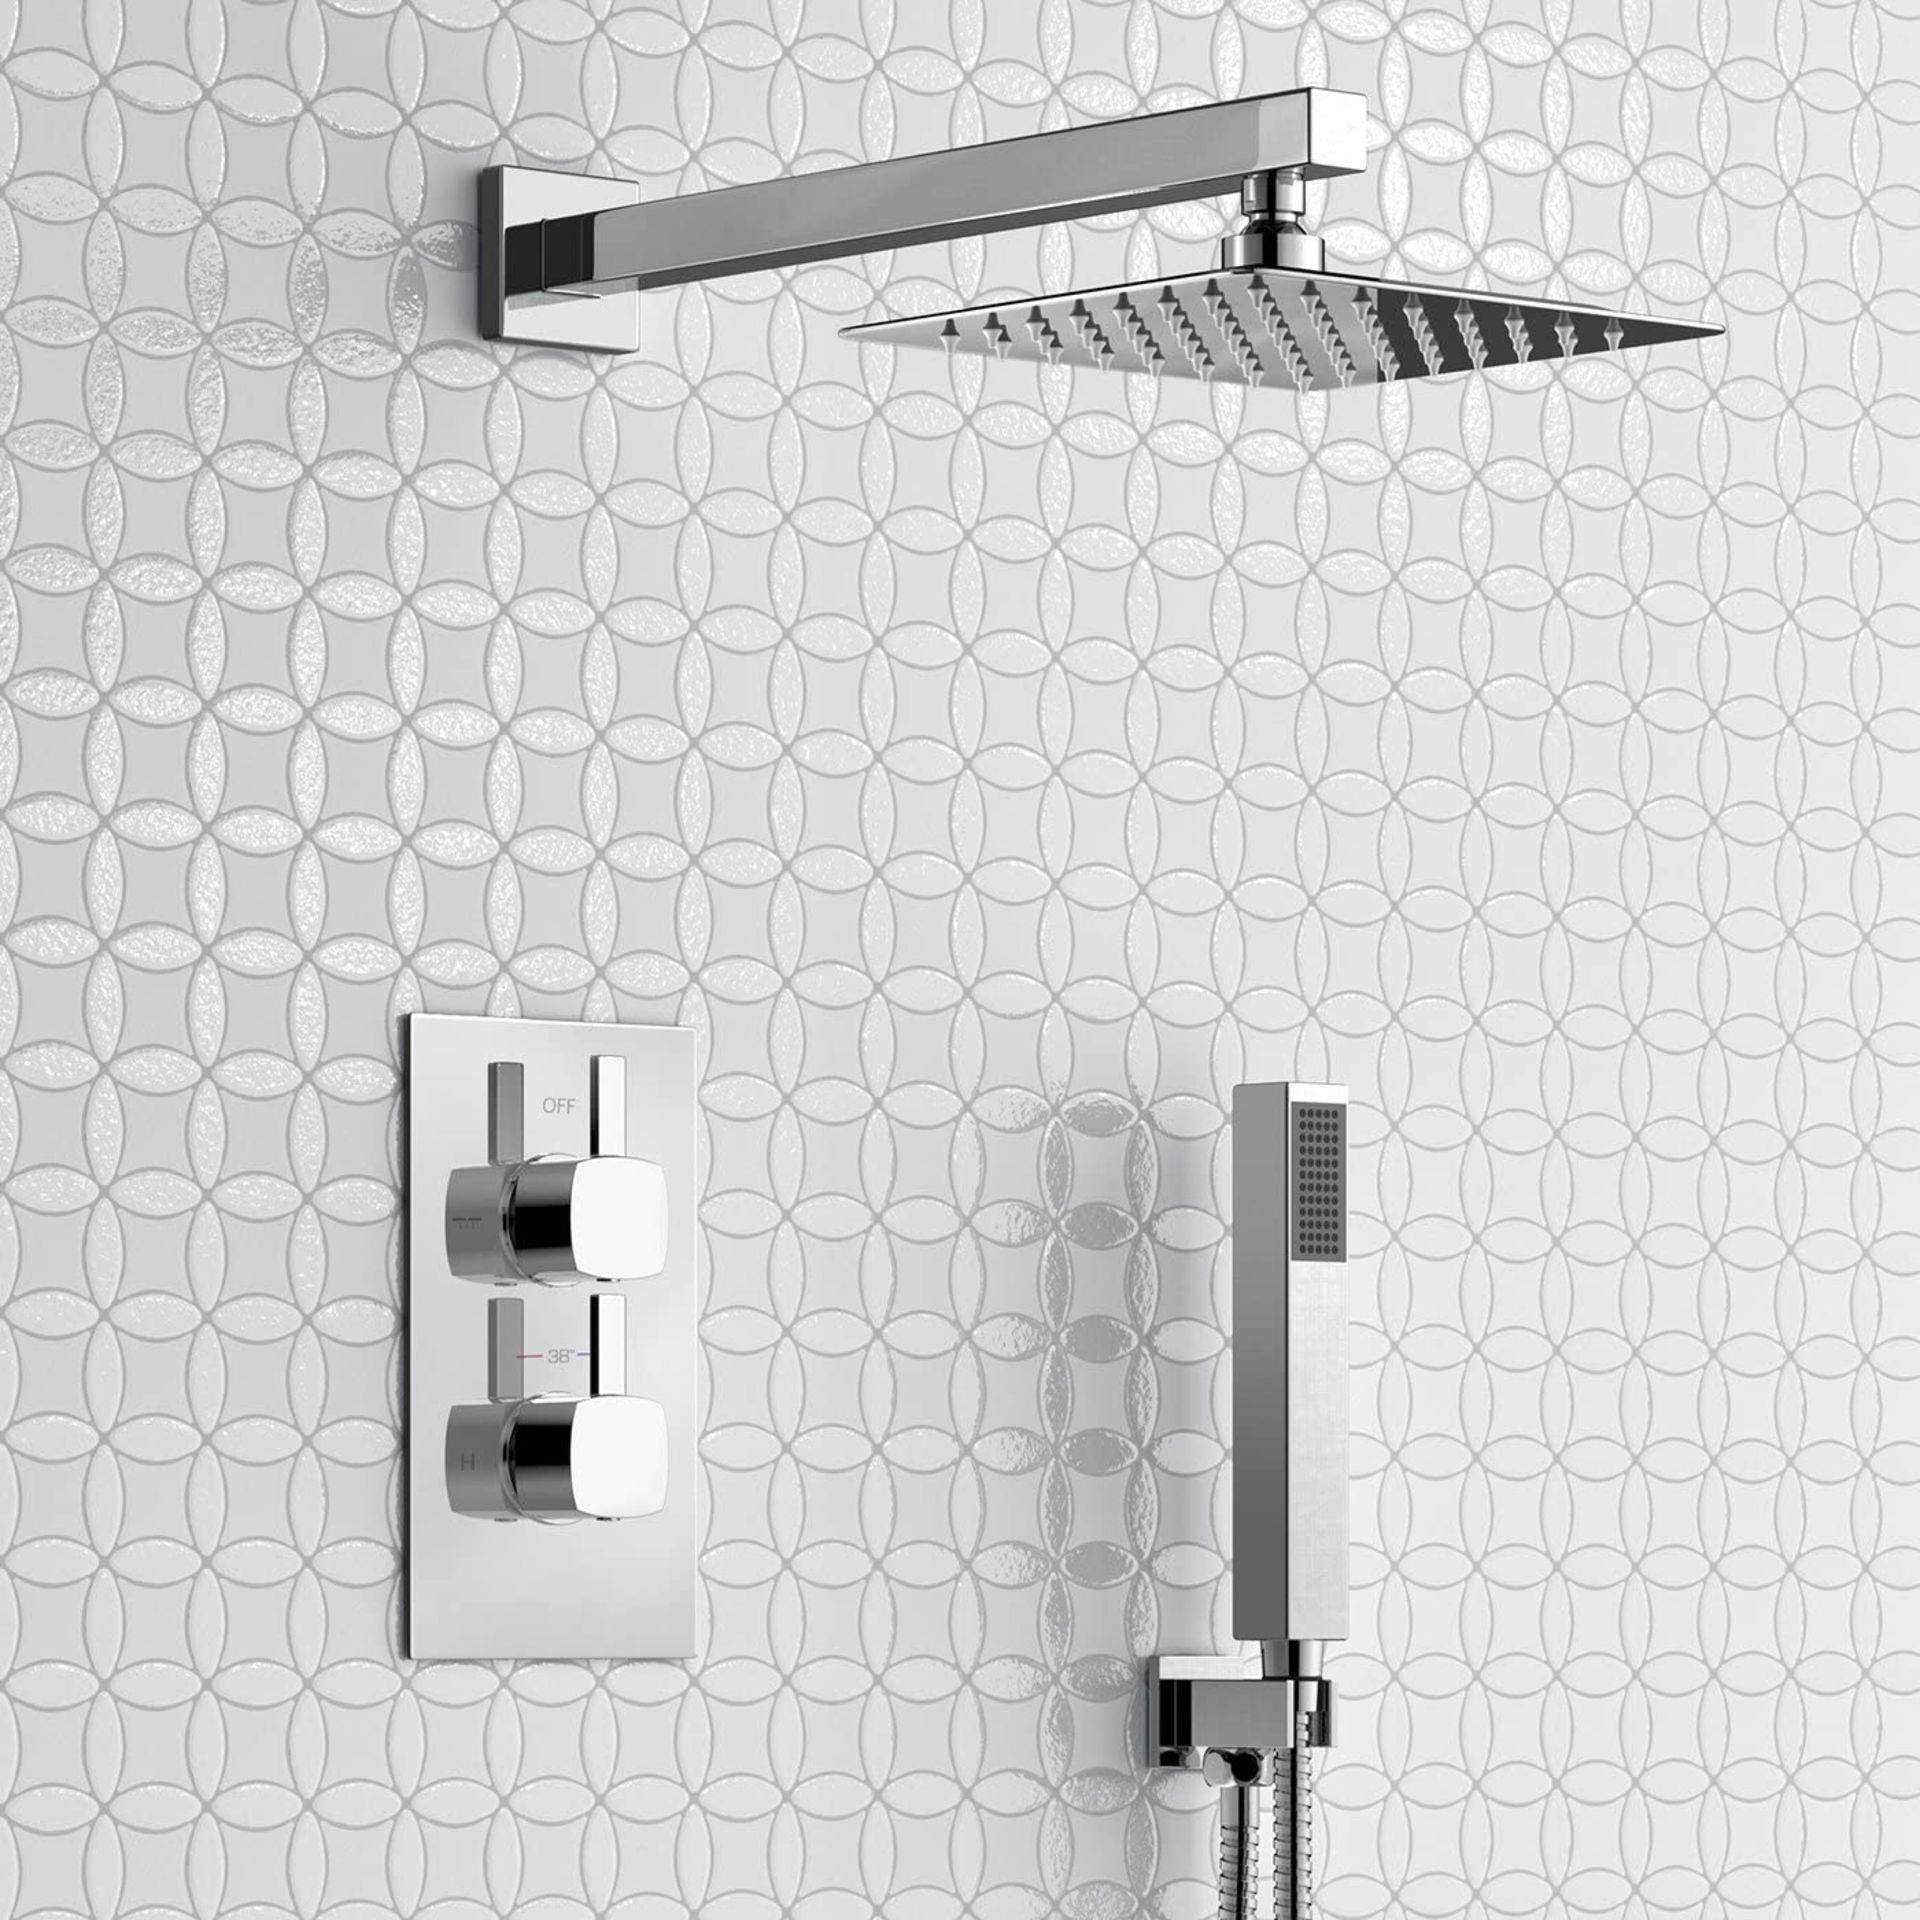 New & Boxed Thermostatic Concealed Mixer Shower Set 8 Inch Head Handset + Chrome 2 Way Valve Ki... - Image 2 of 3